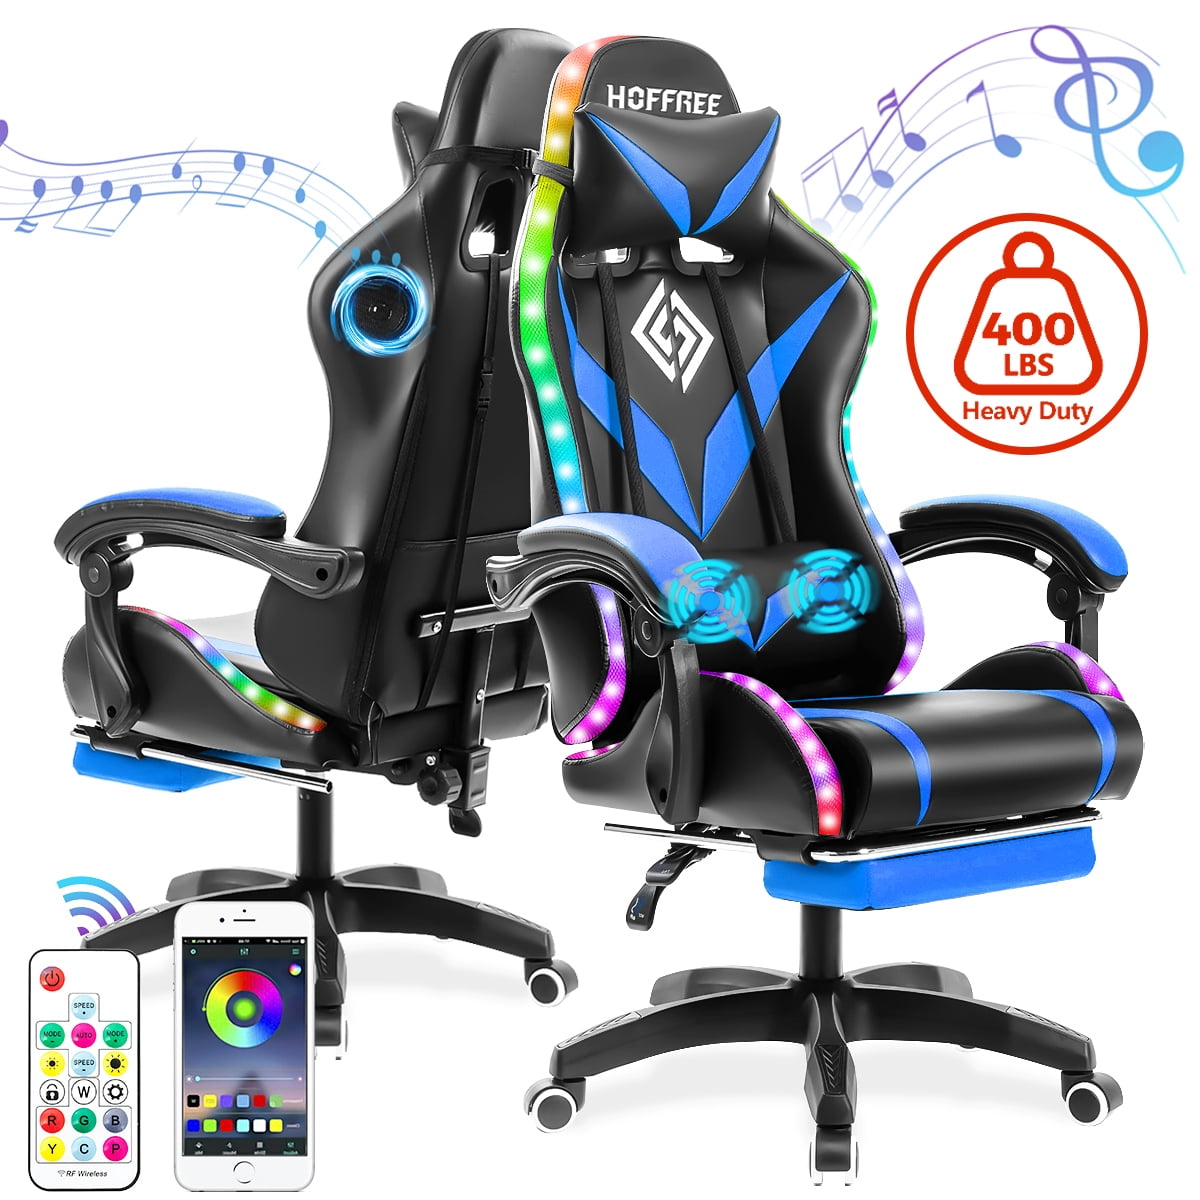 Wardianzaak stilte Janice Hoffree Bluetooth Speaker Gaming Chairs with Massage, Video Racing Style  Ergonomic PC Computer Office Chairs with RGB LED Lights, High Back  Adjustable Footrest Massgae Lumbar Pillow, 400lbs Load - Walmart.com